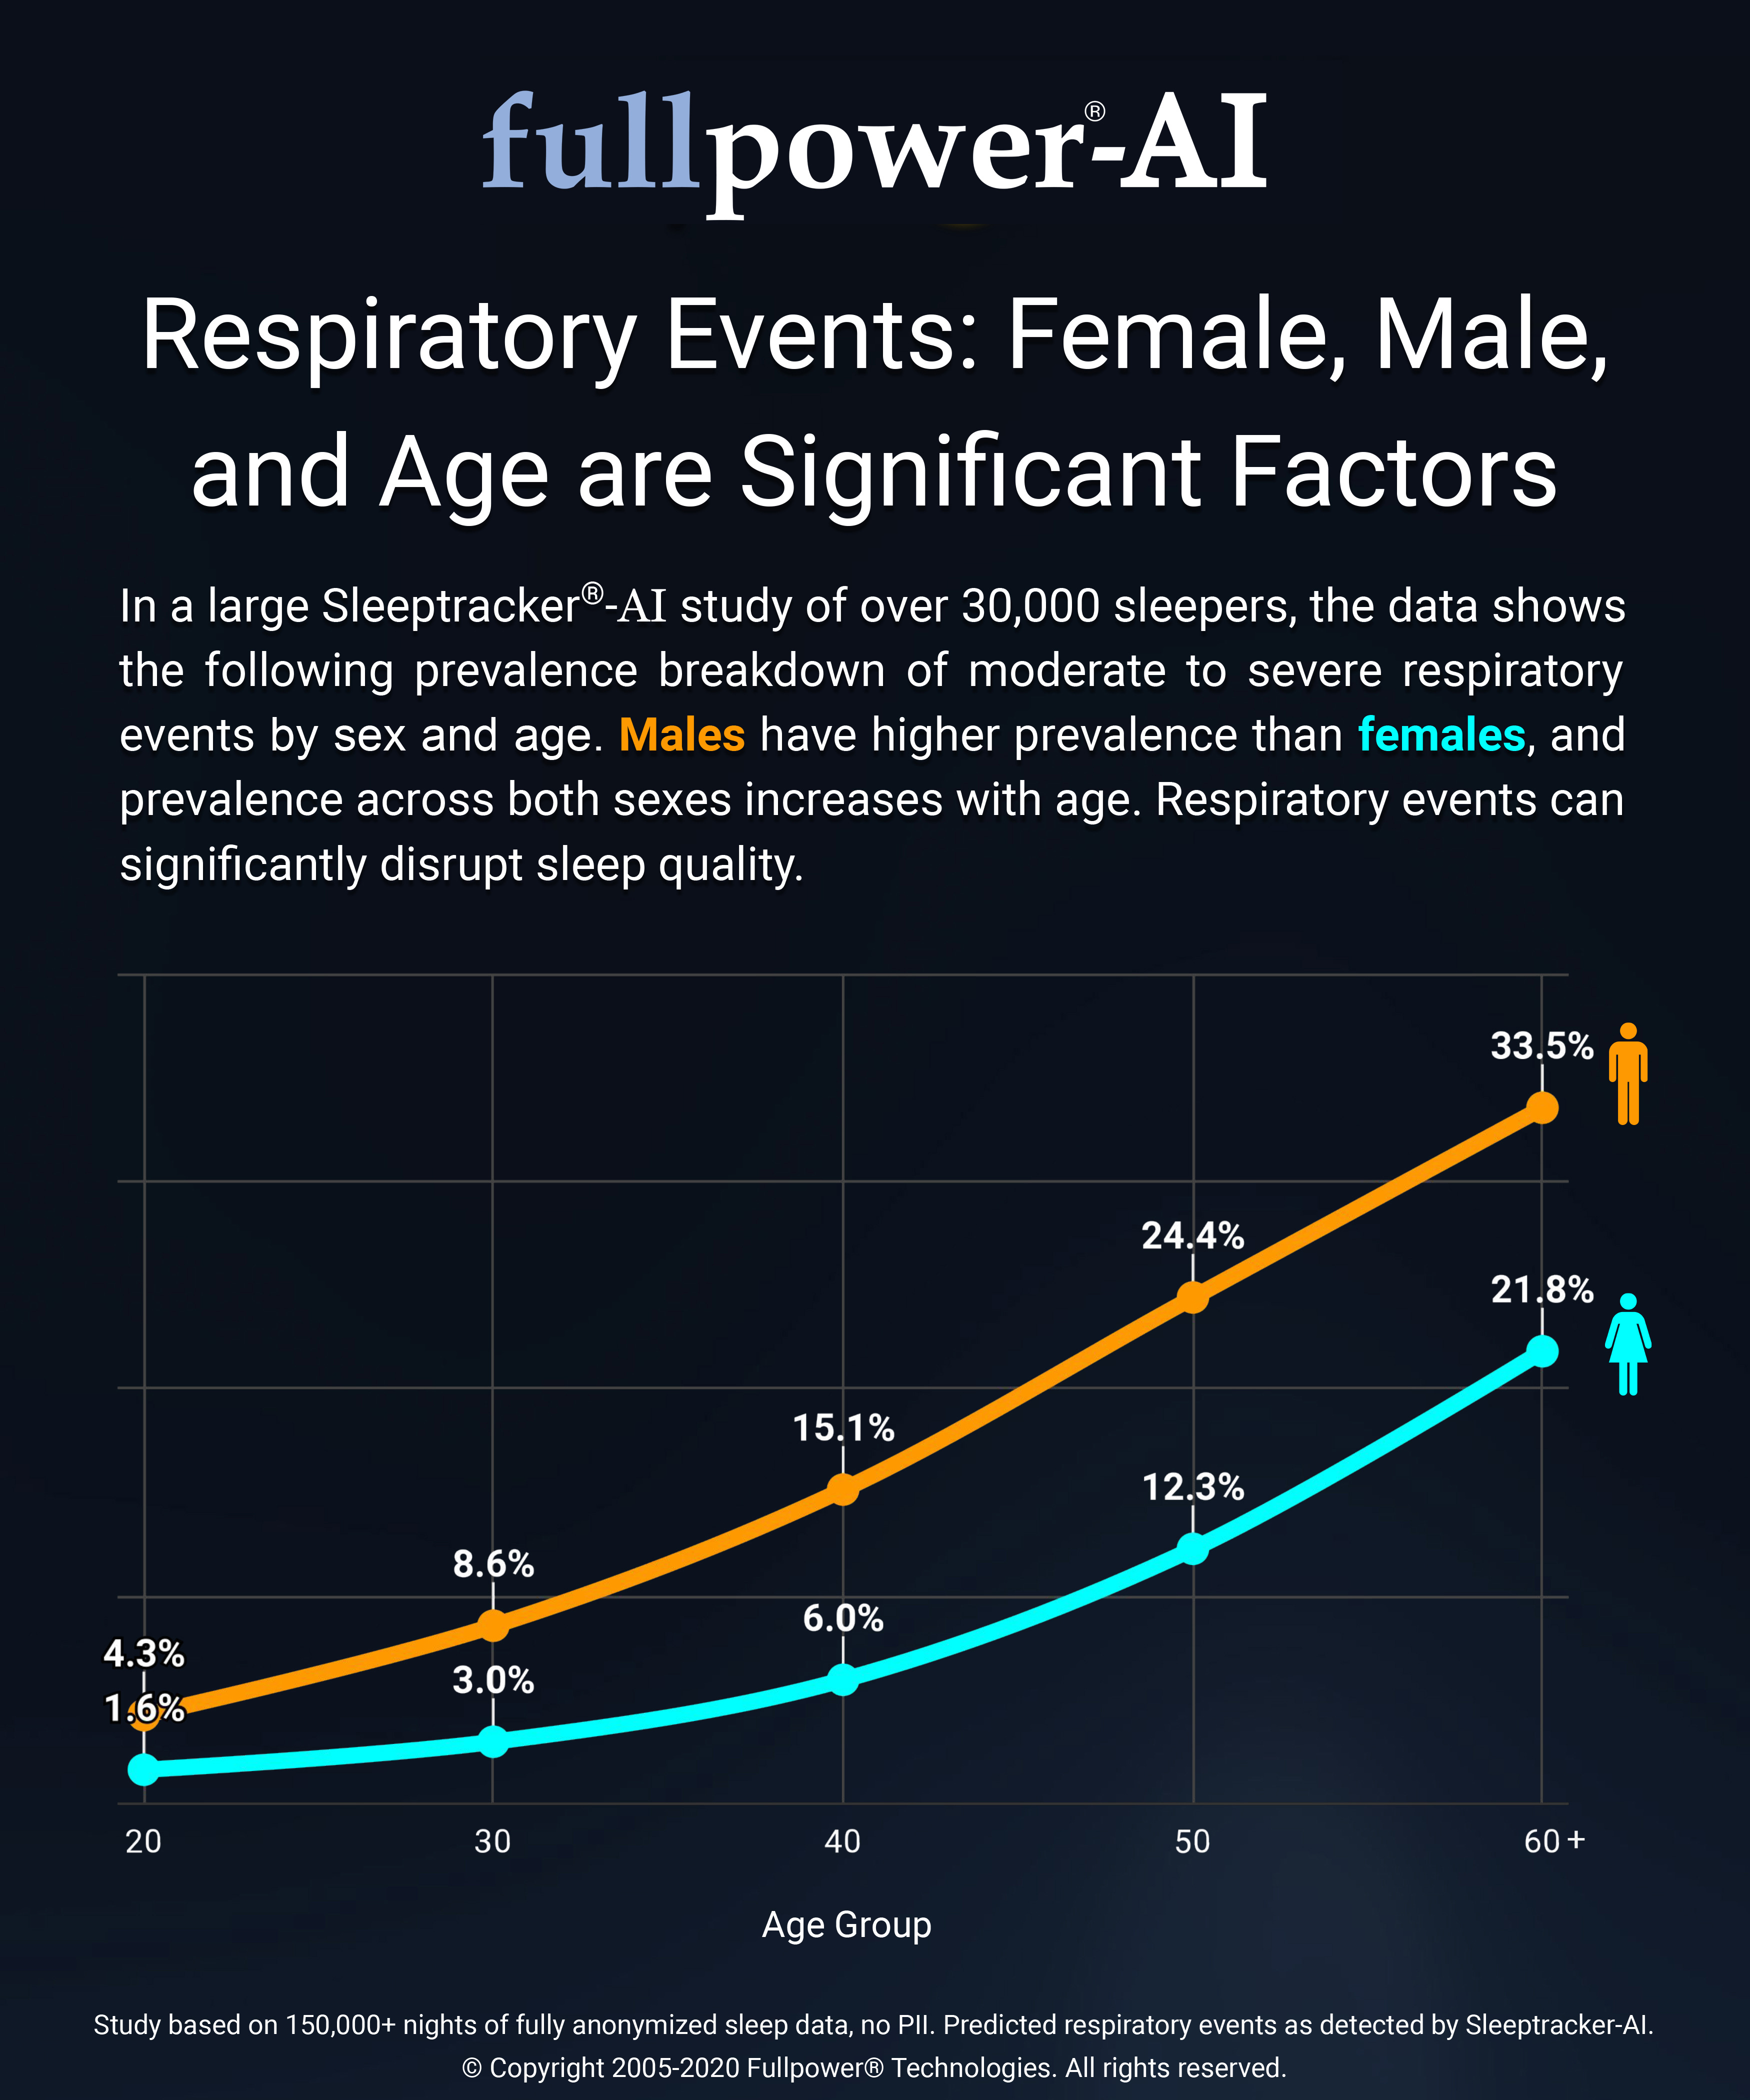 Respiratory Events: Female, Male, and Age are significant factors